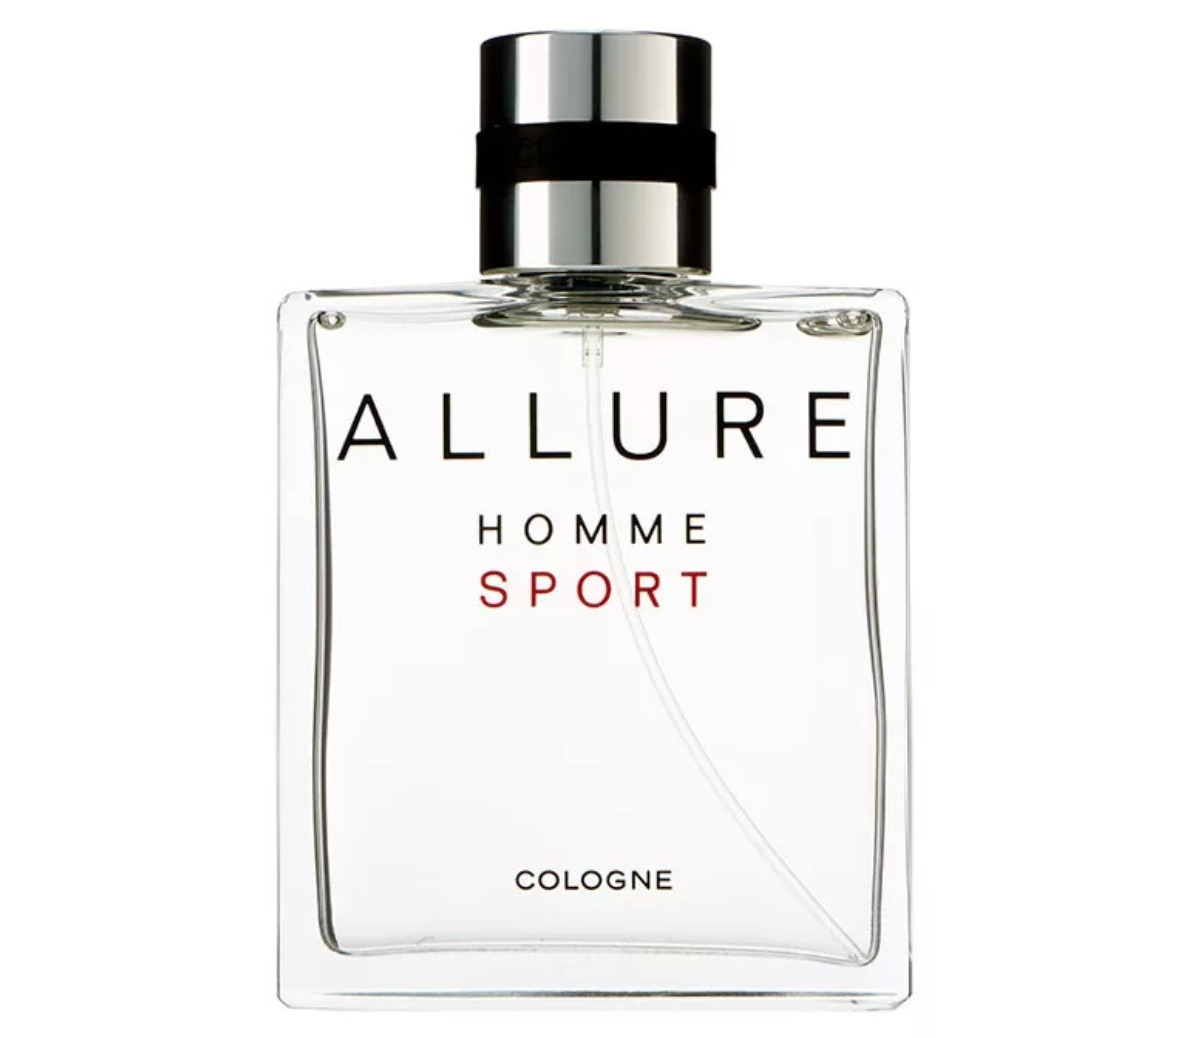 Homme sport cologne. Chanel Allure homme Sport. Chanel Allure homme Sport 100ml. Chanel Allure homme Sport Cologne. Chanel Allure Sport 100 ml.